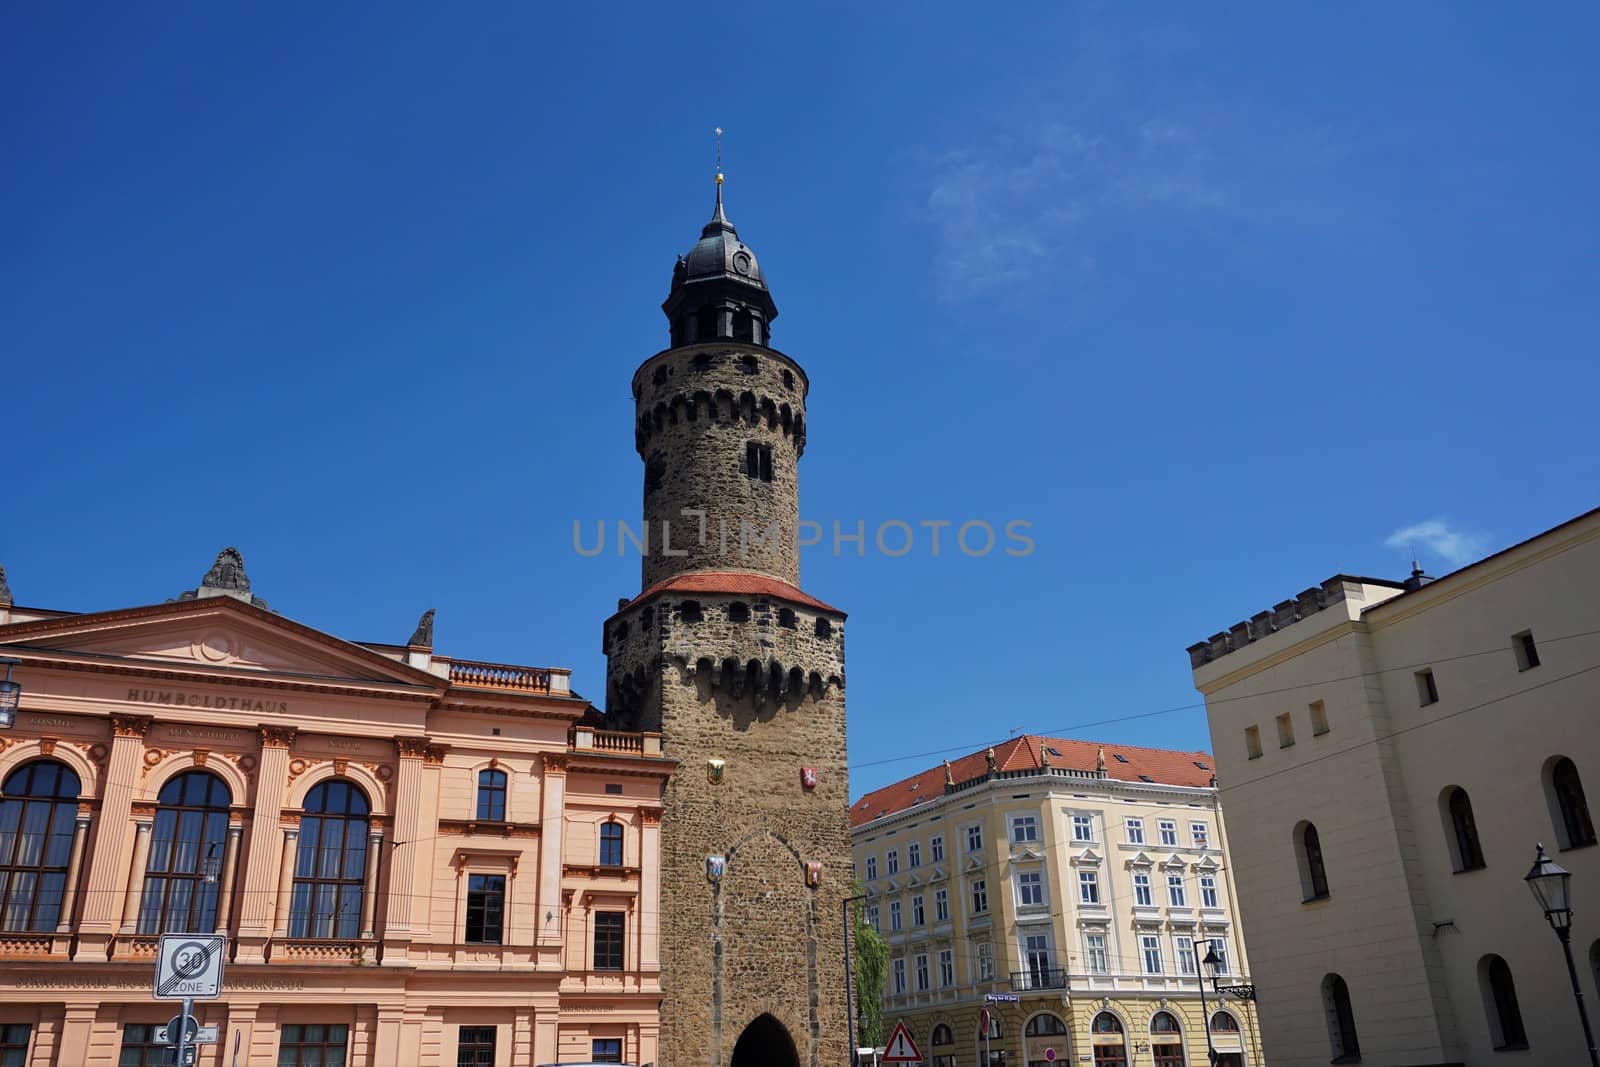 The Reichenbach tower surrounded by different buildings in Goerlitz, Germany